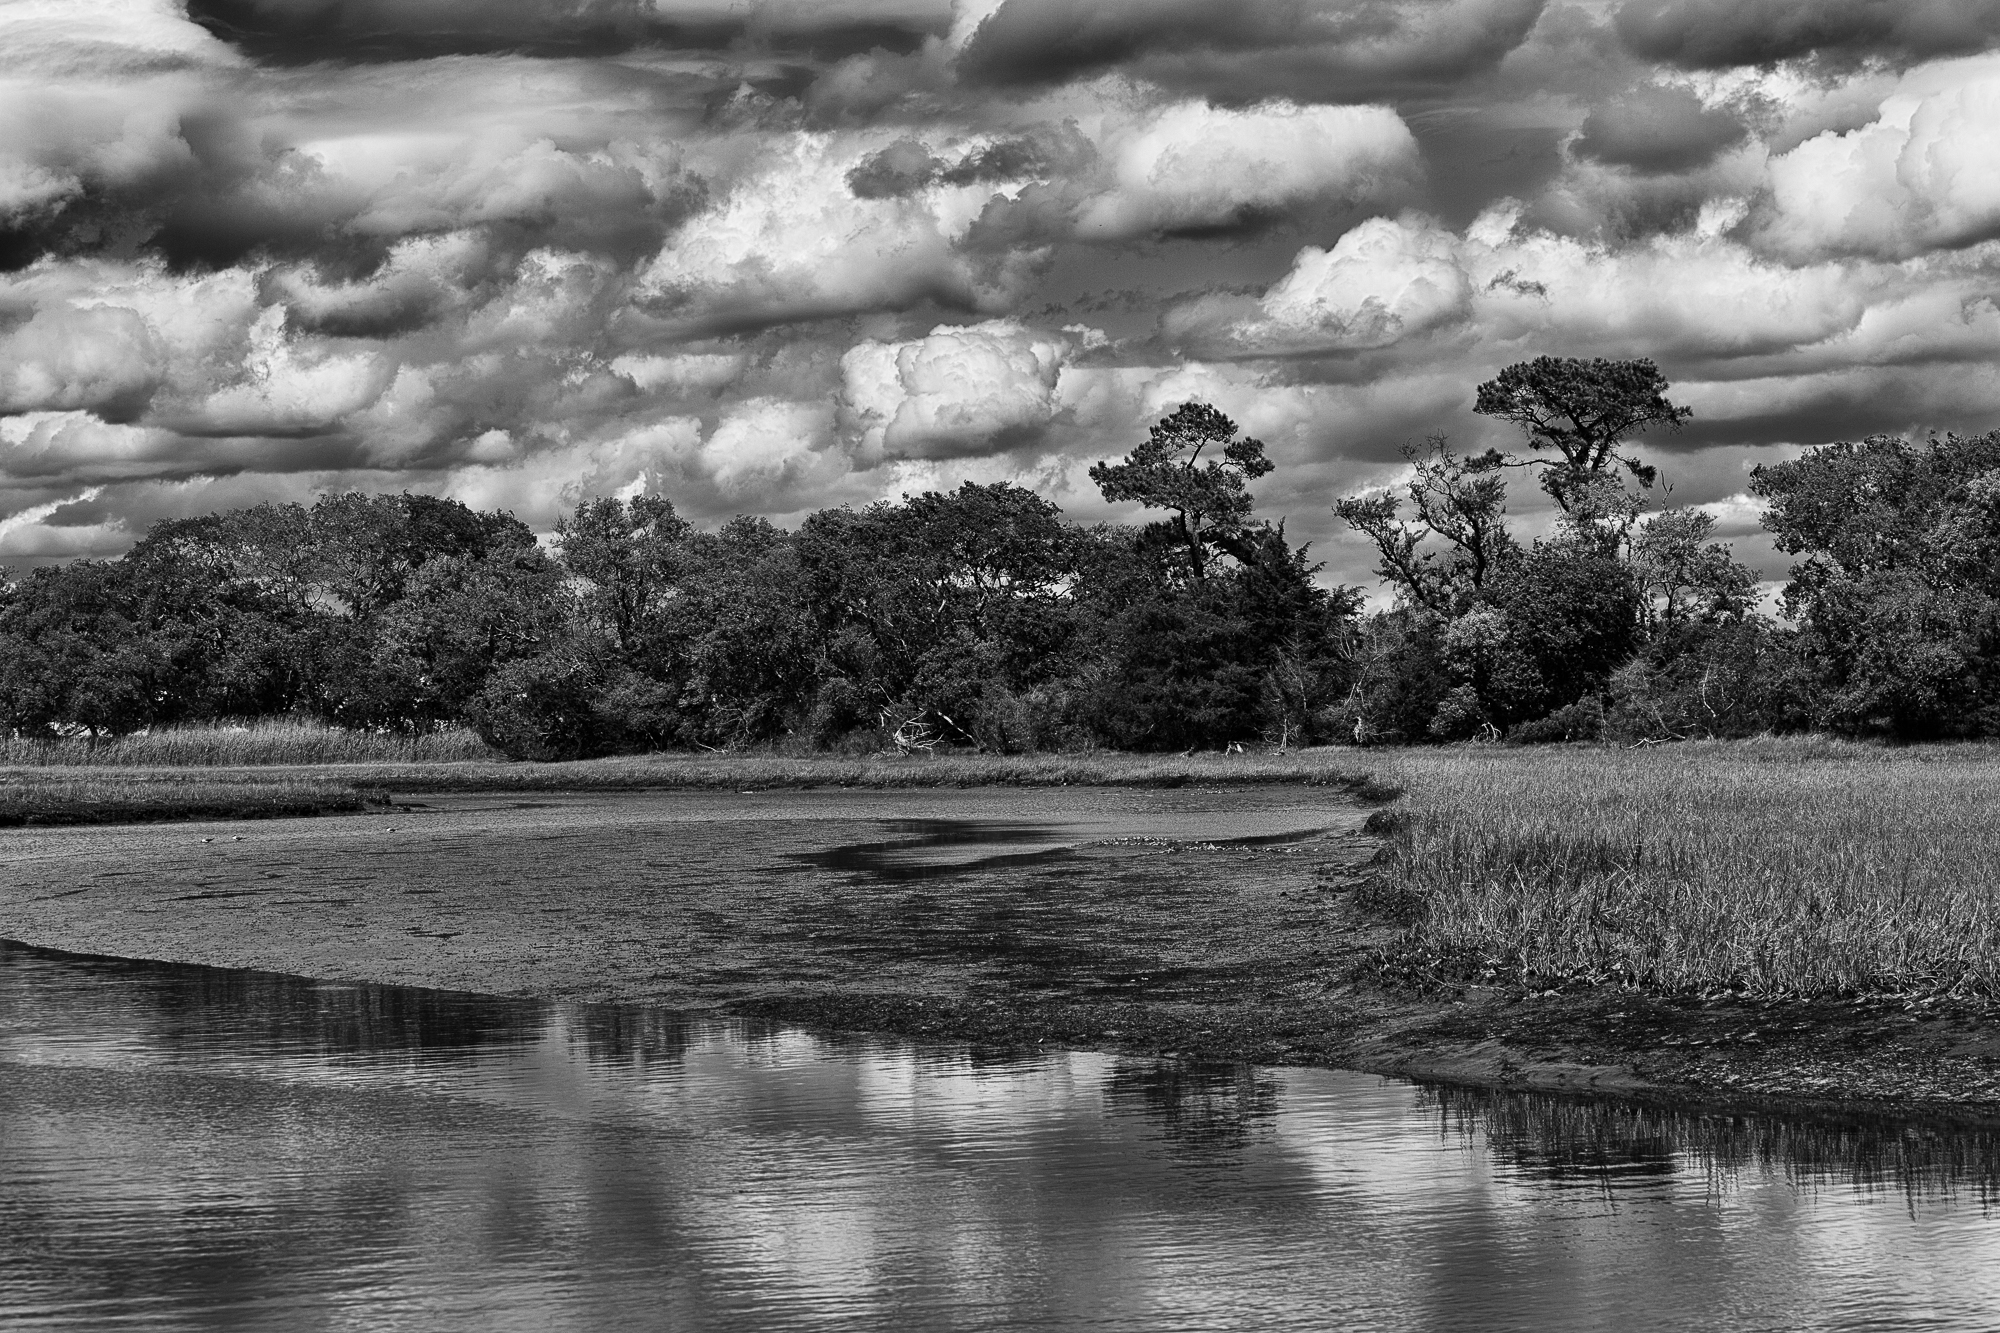 Thick white clouds hang low over a stand of trees along the edge of an open wetland.